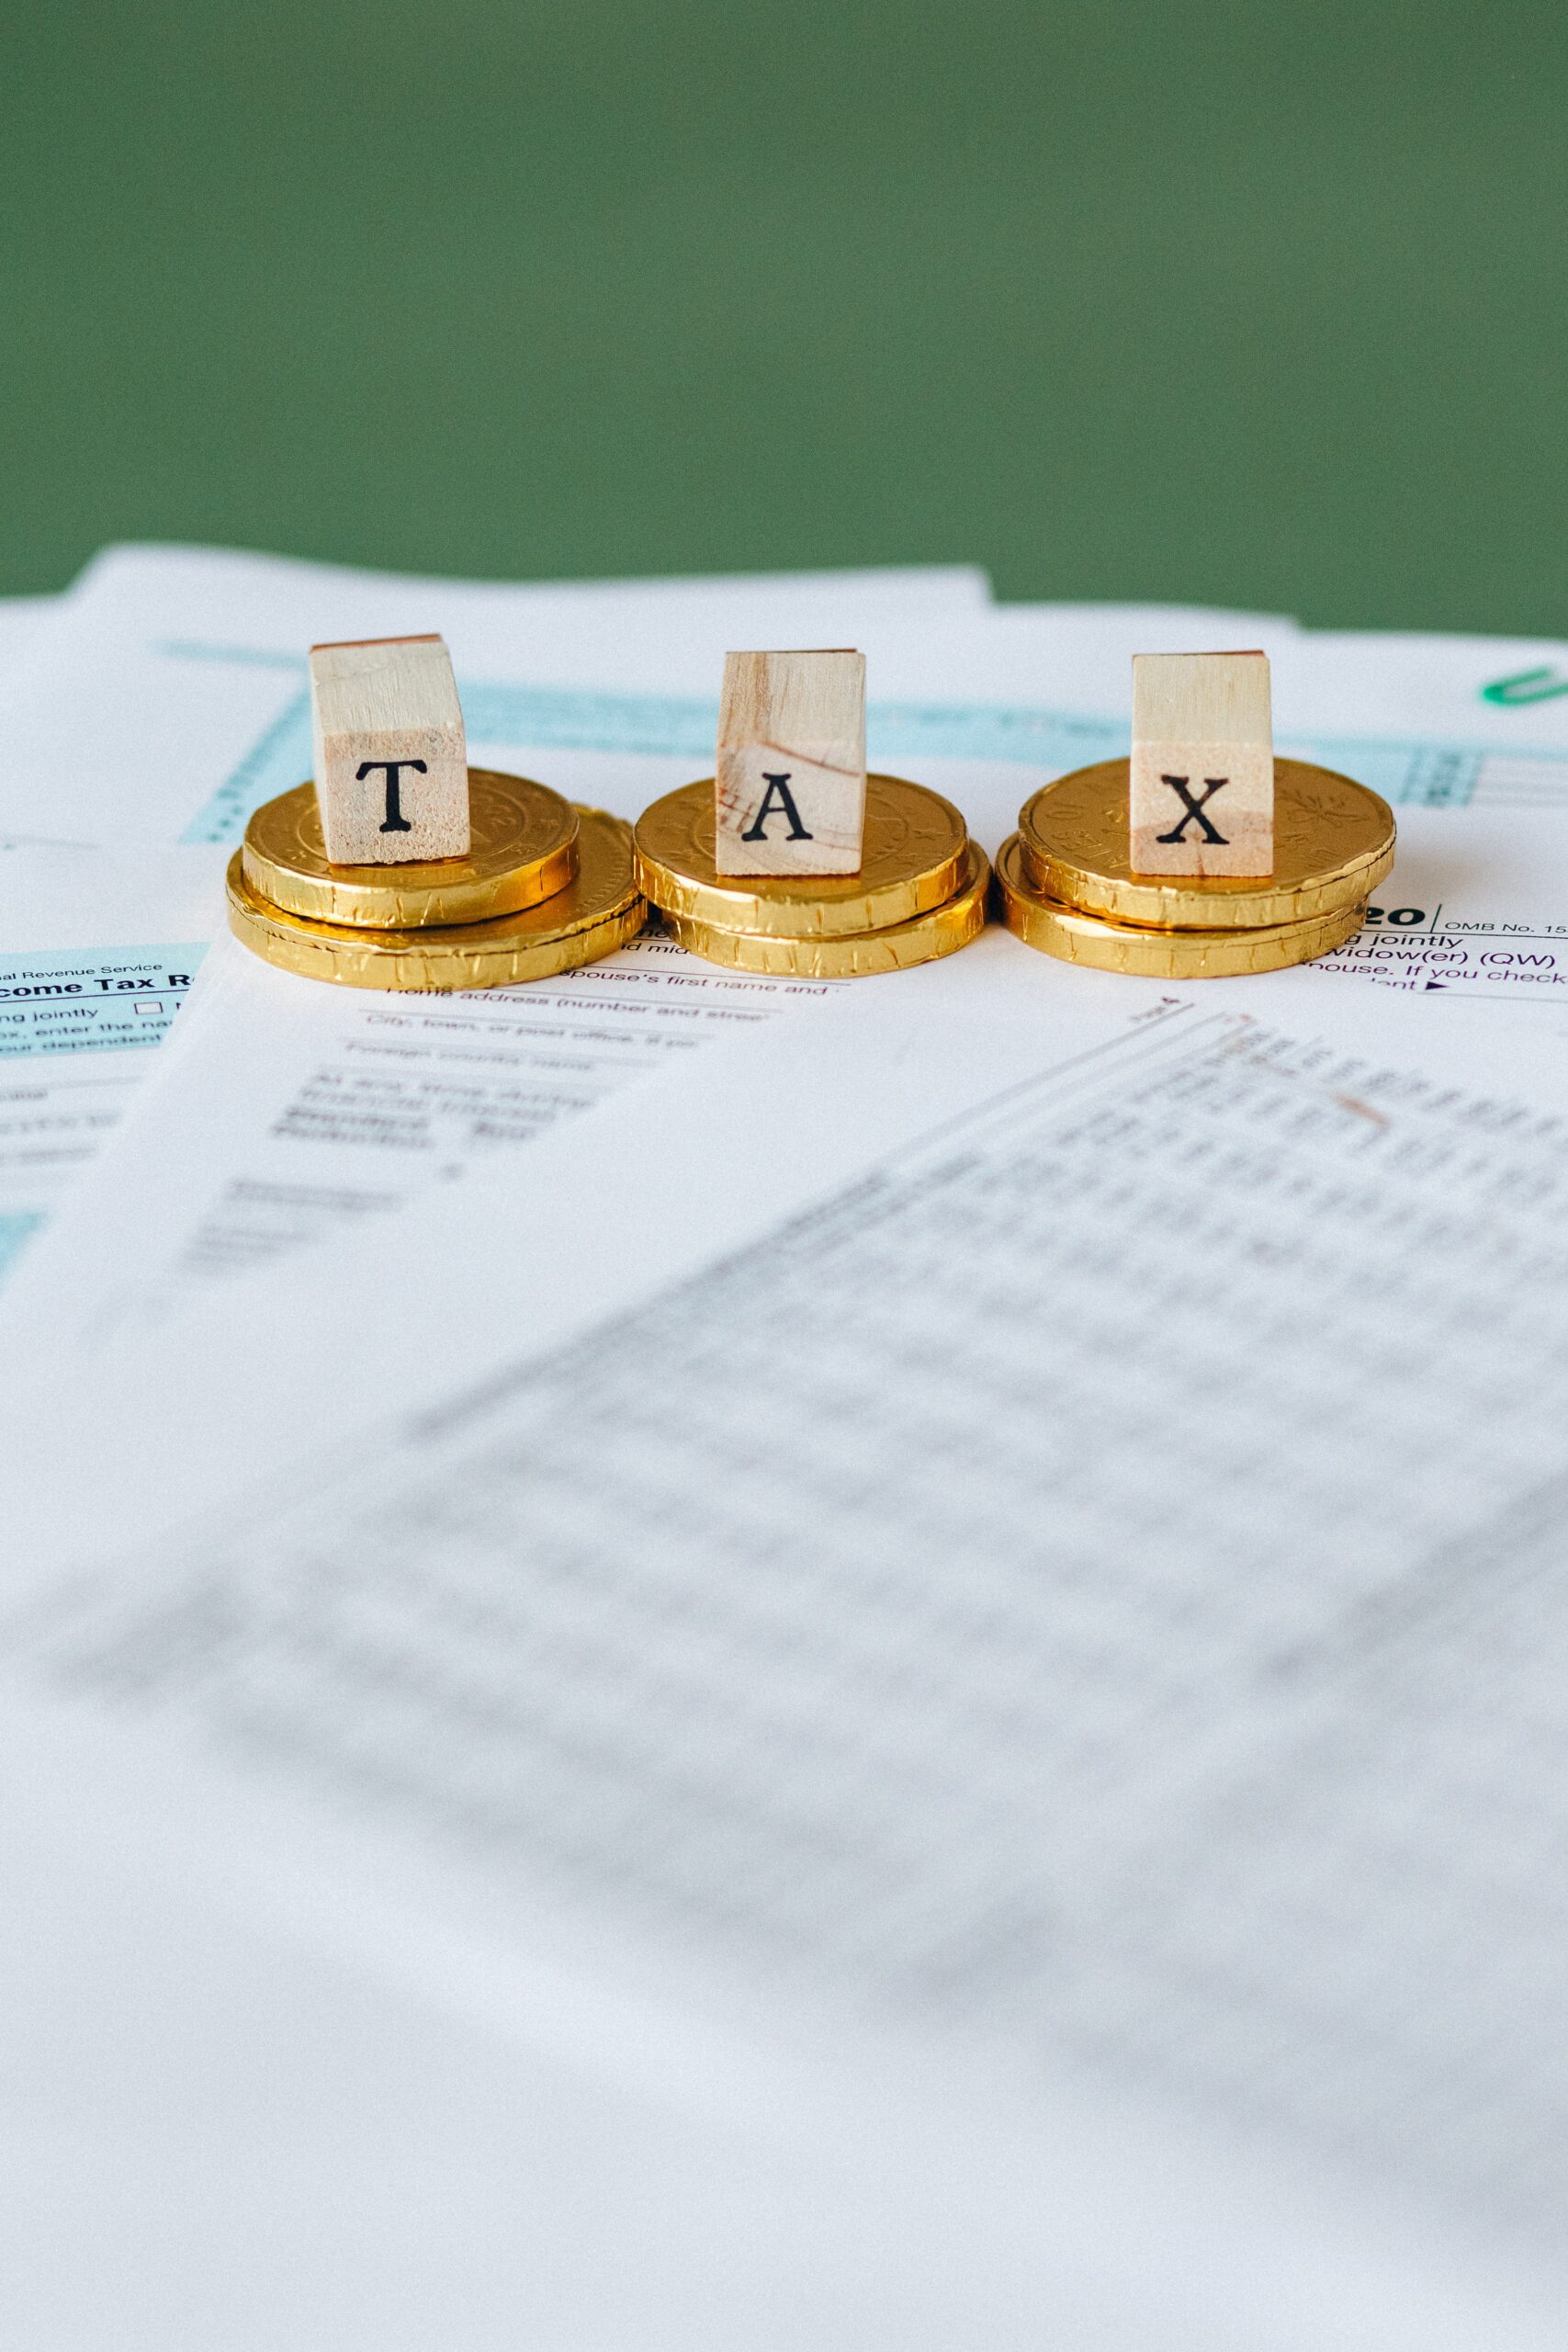 Do I Have to Pay Taxes on Trusts?